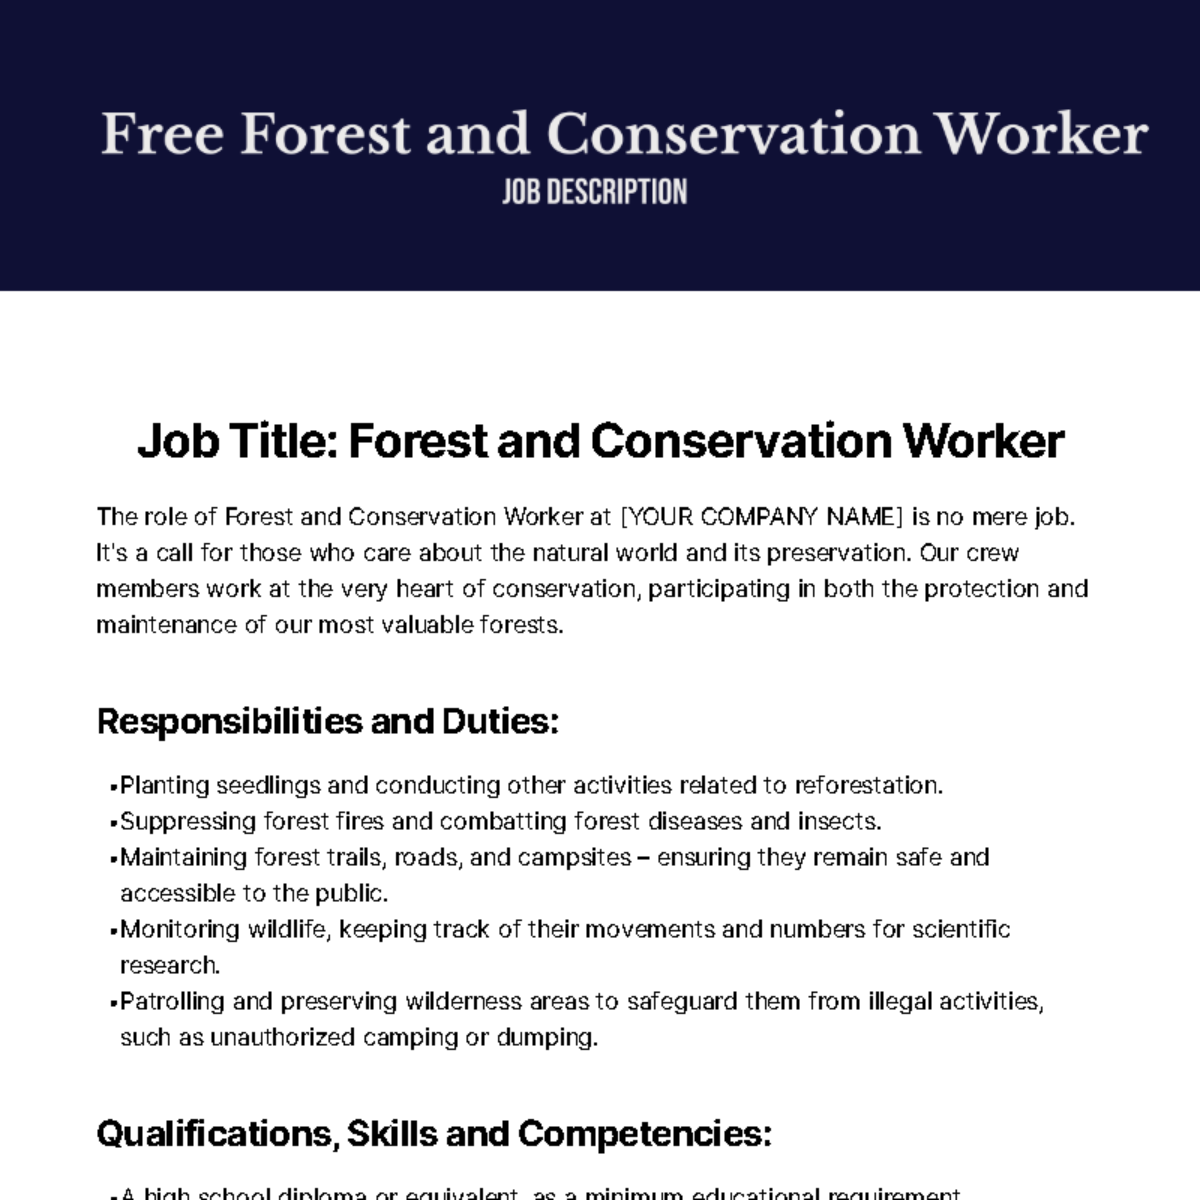 Free Forest and Conservation Worker Job Description Template